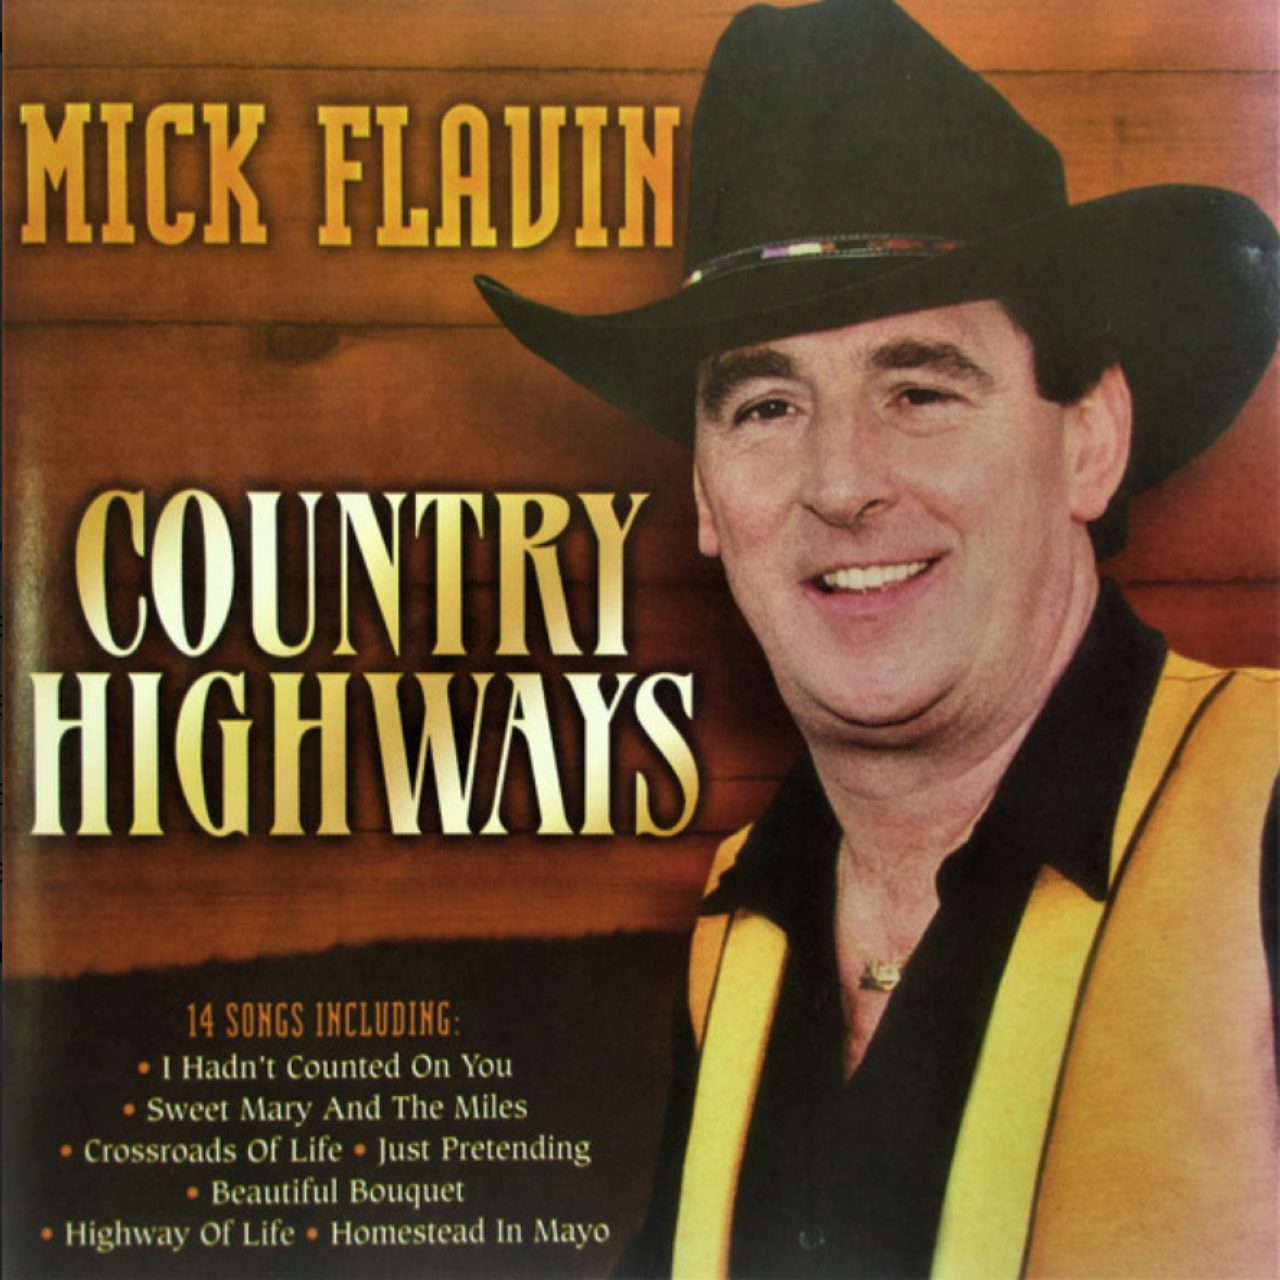 Mick Flavin – Country Highways cover album